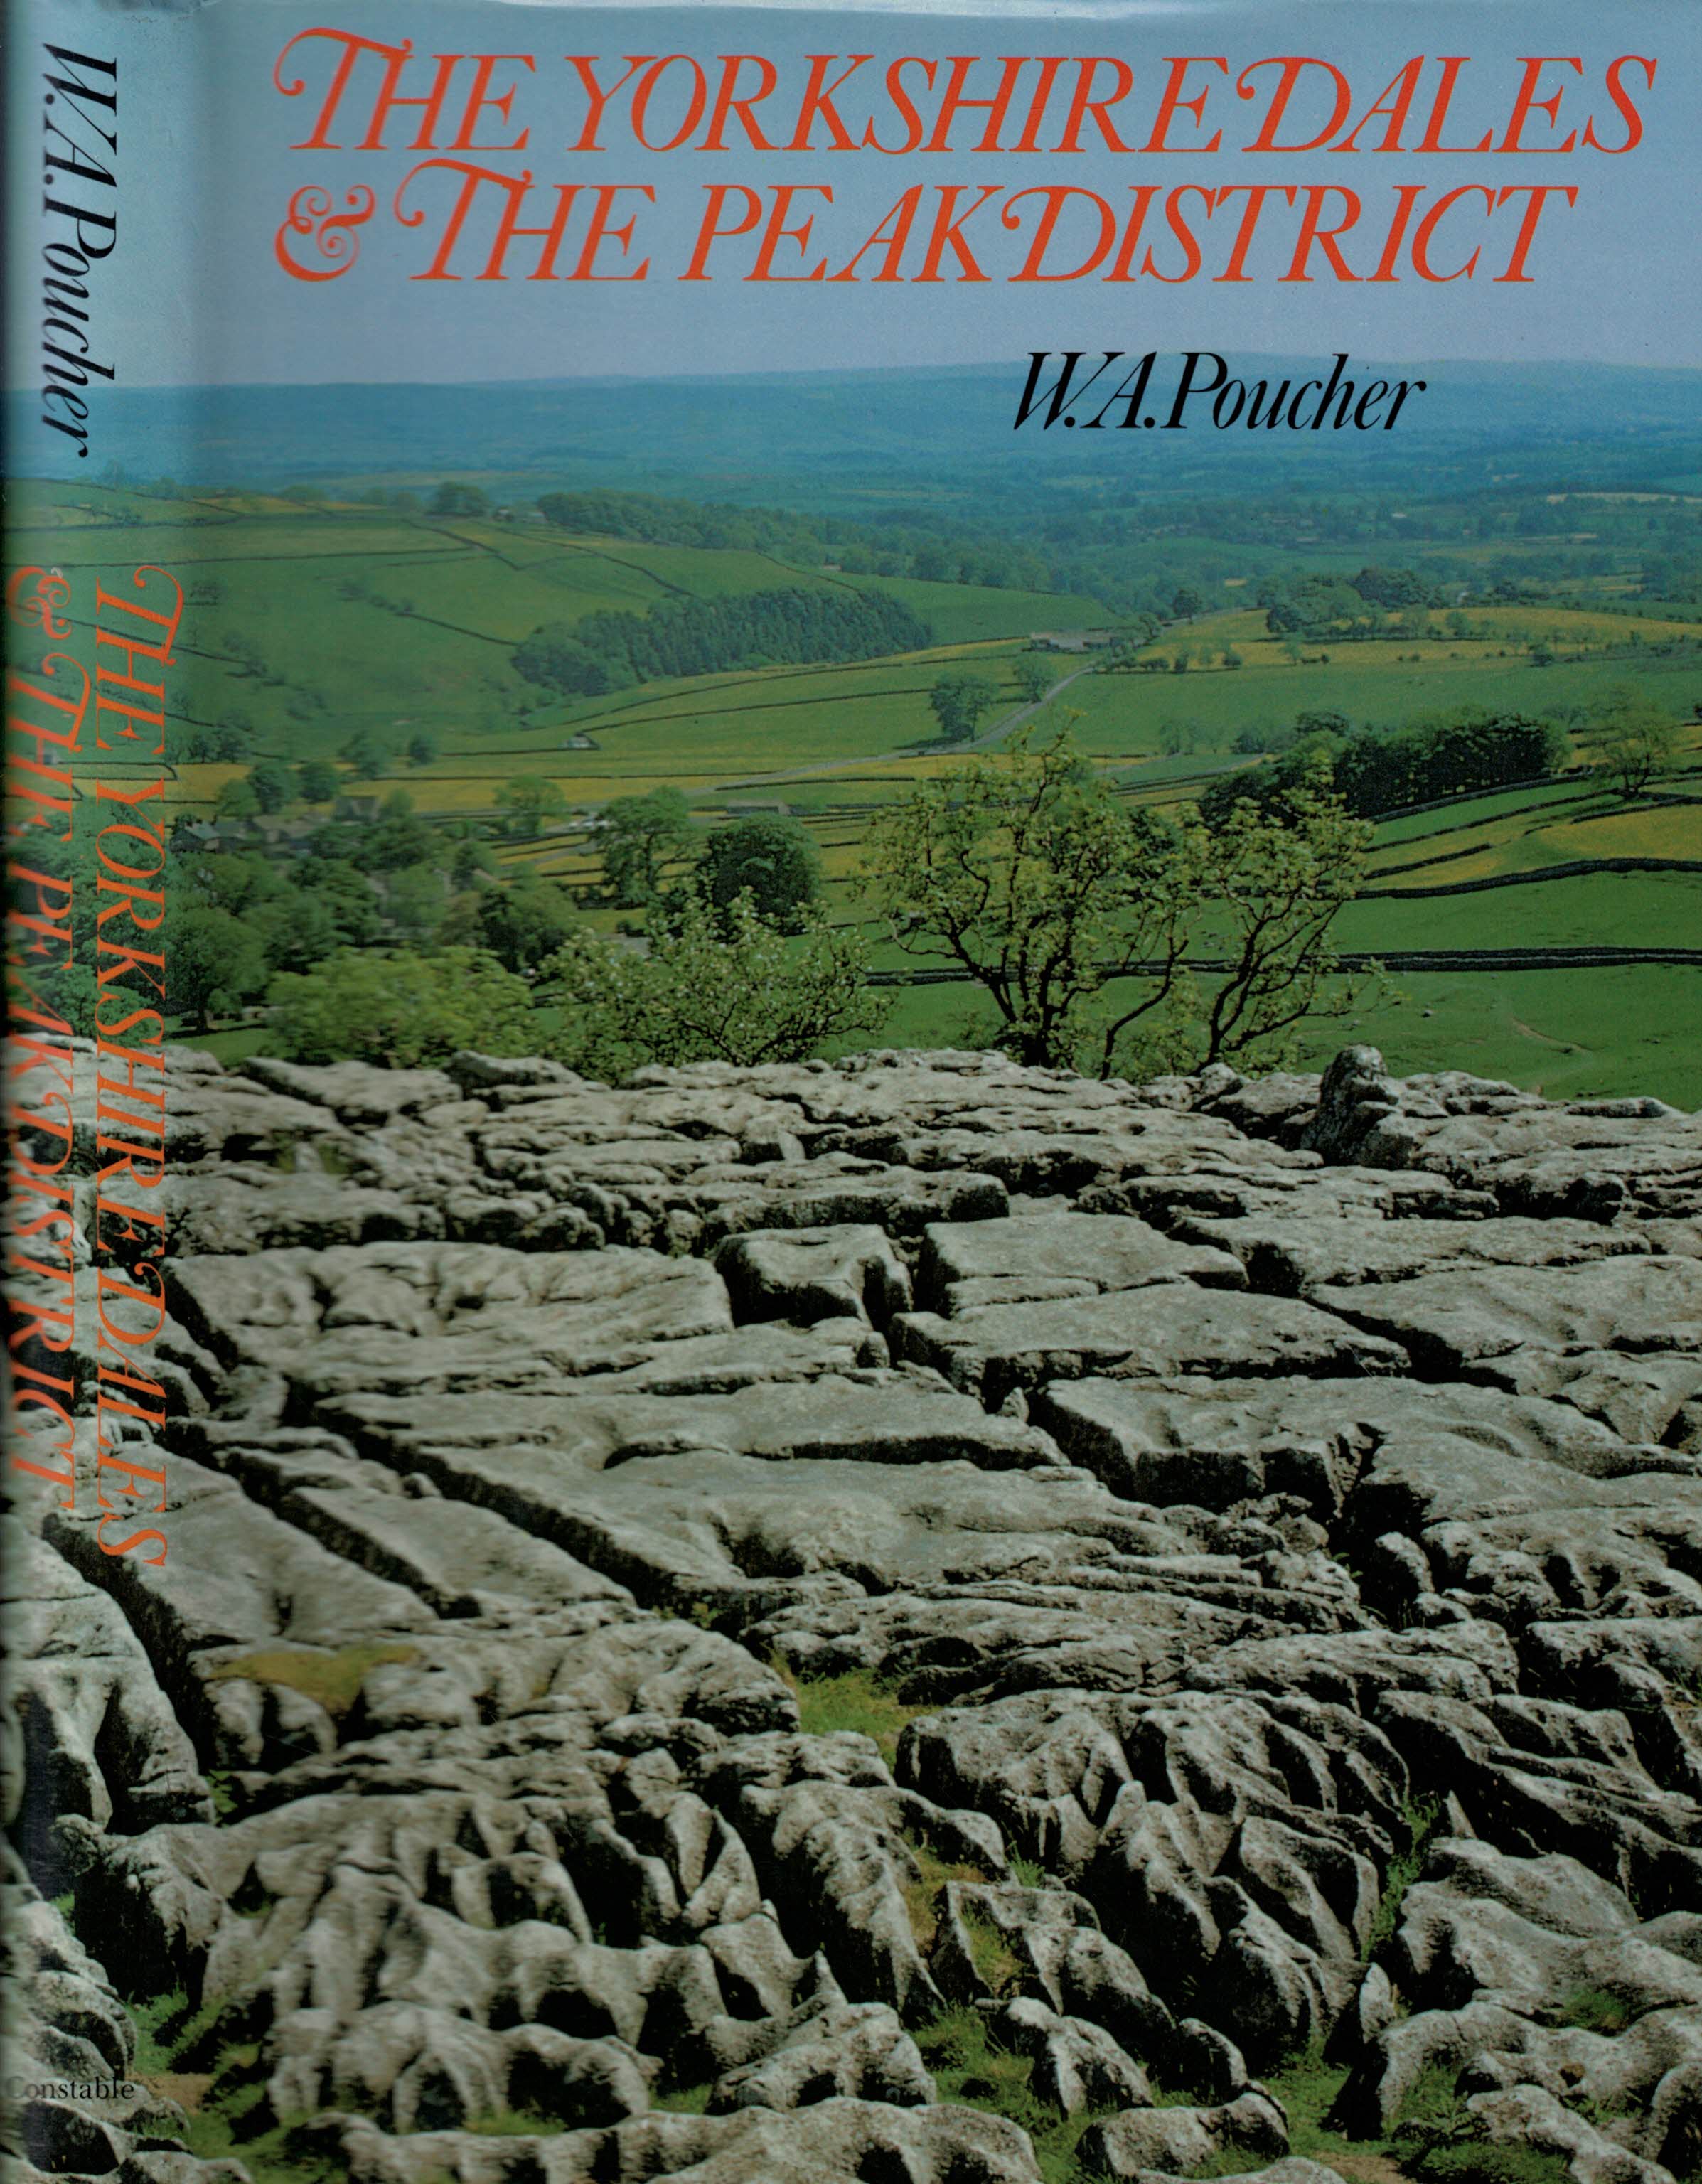 The Yorkshire Dales & the Peak District